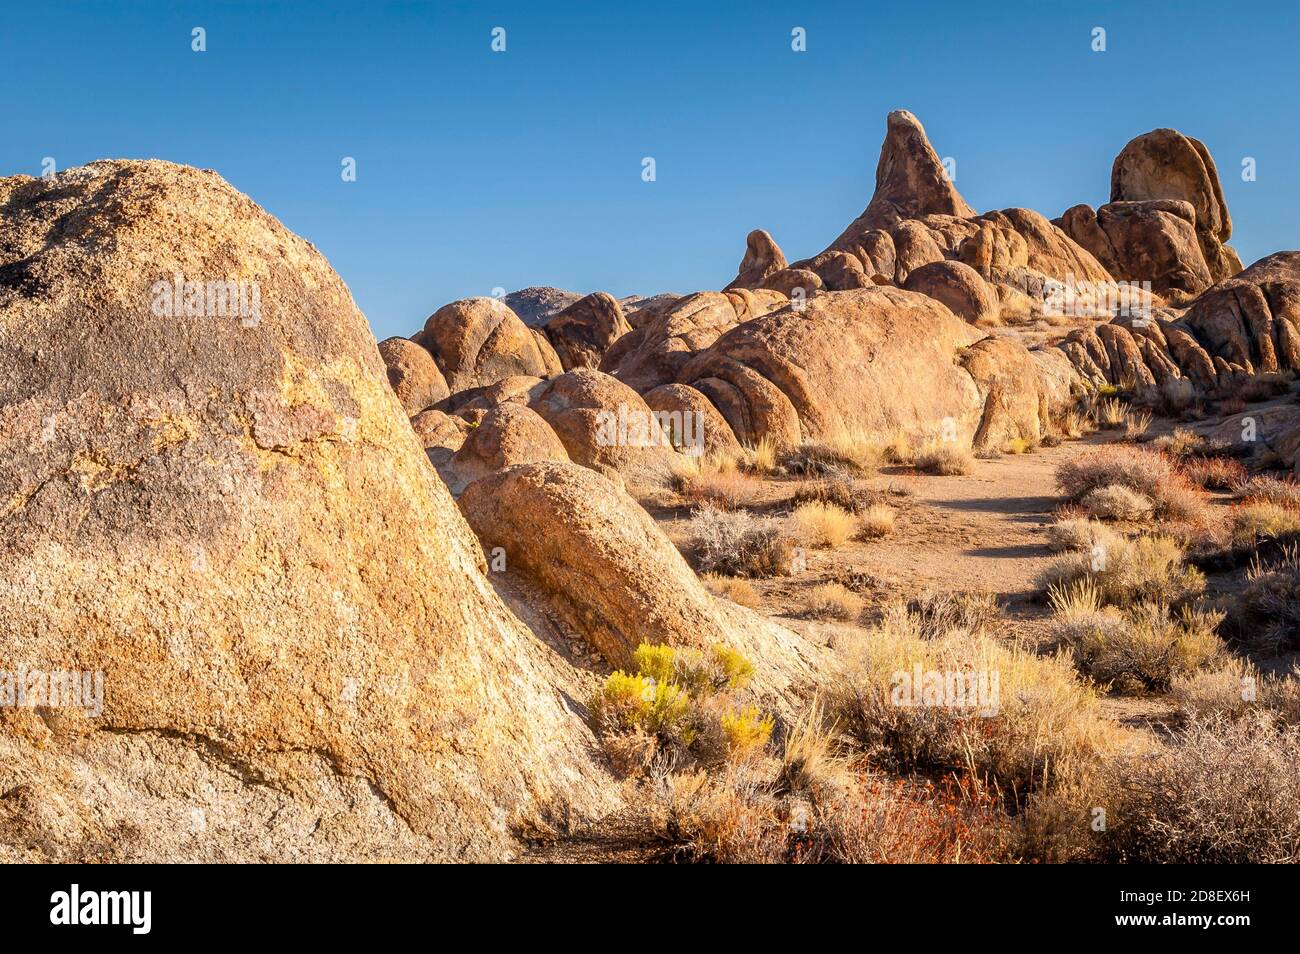 Rock formations in the Alabama Hills area to California. Stock Photo